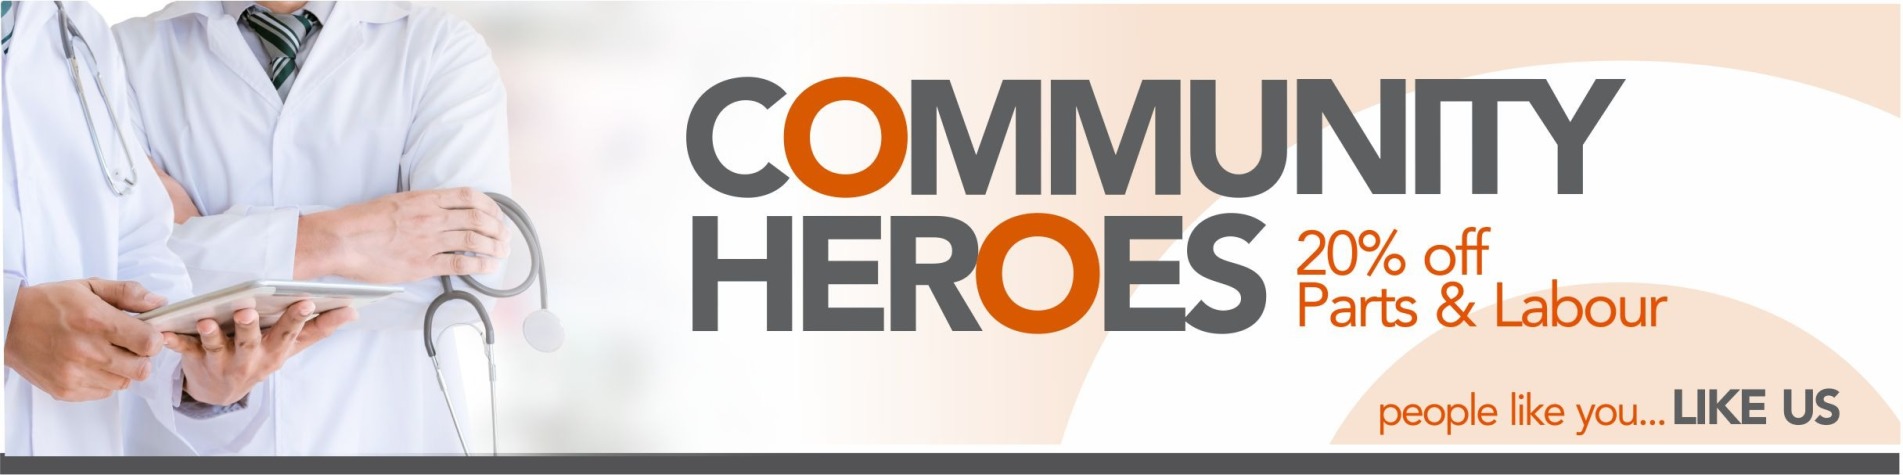 20% Off for Community Heroes